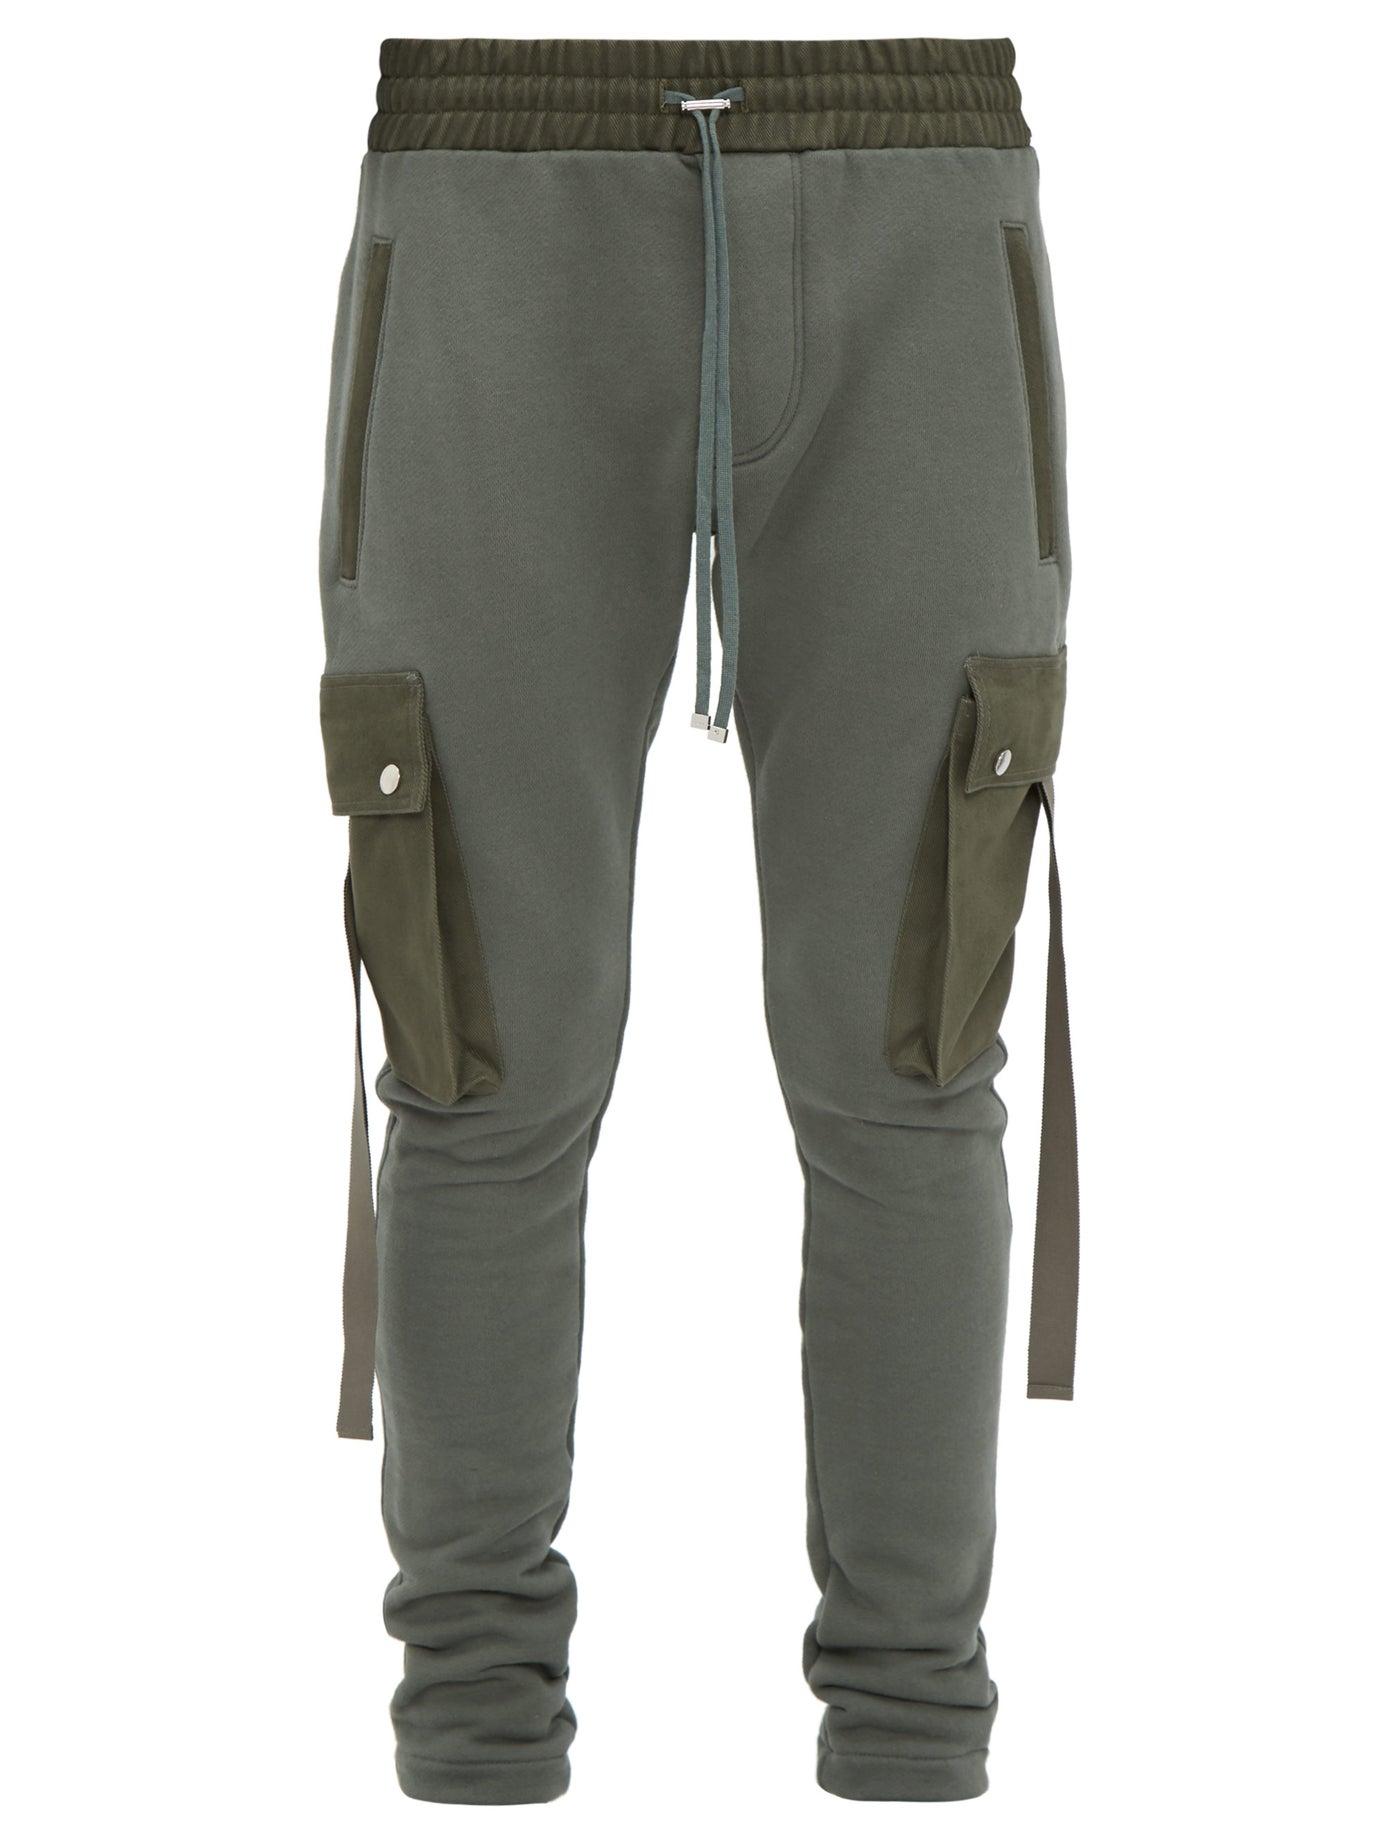 Amiri Canvas-trimmed Track Pants in Green for Men - Lyst